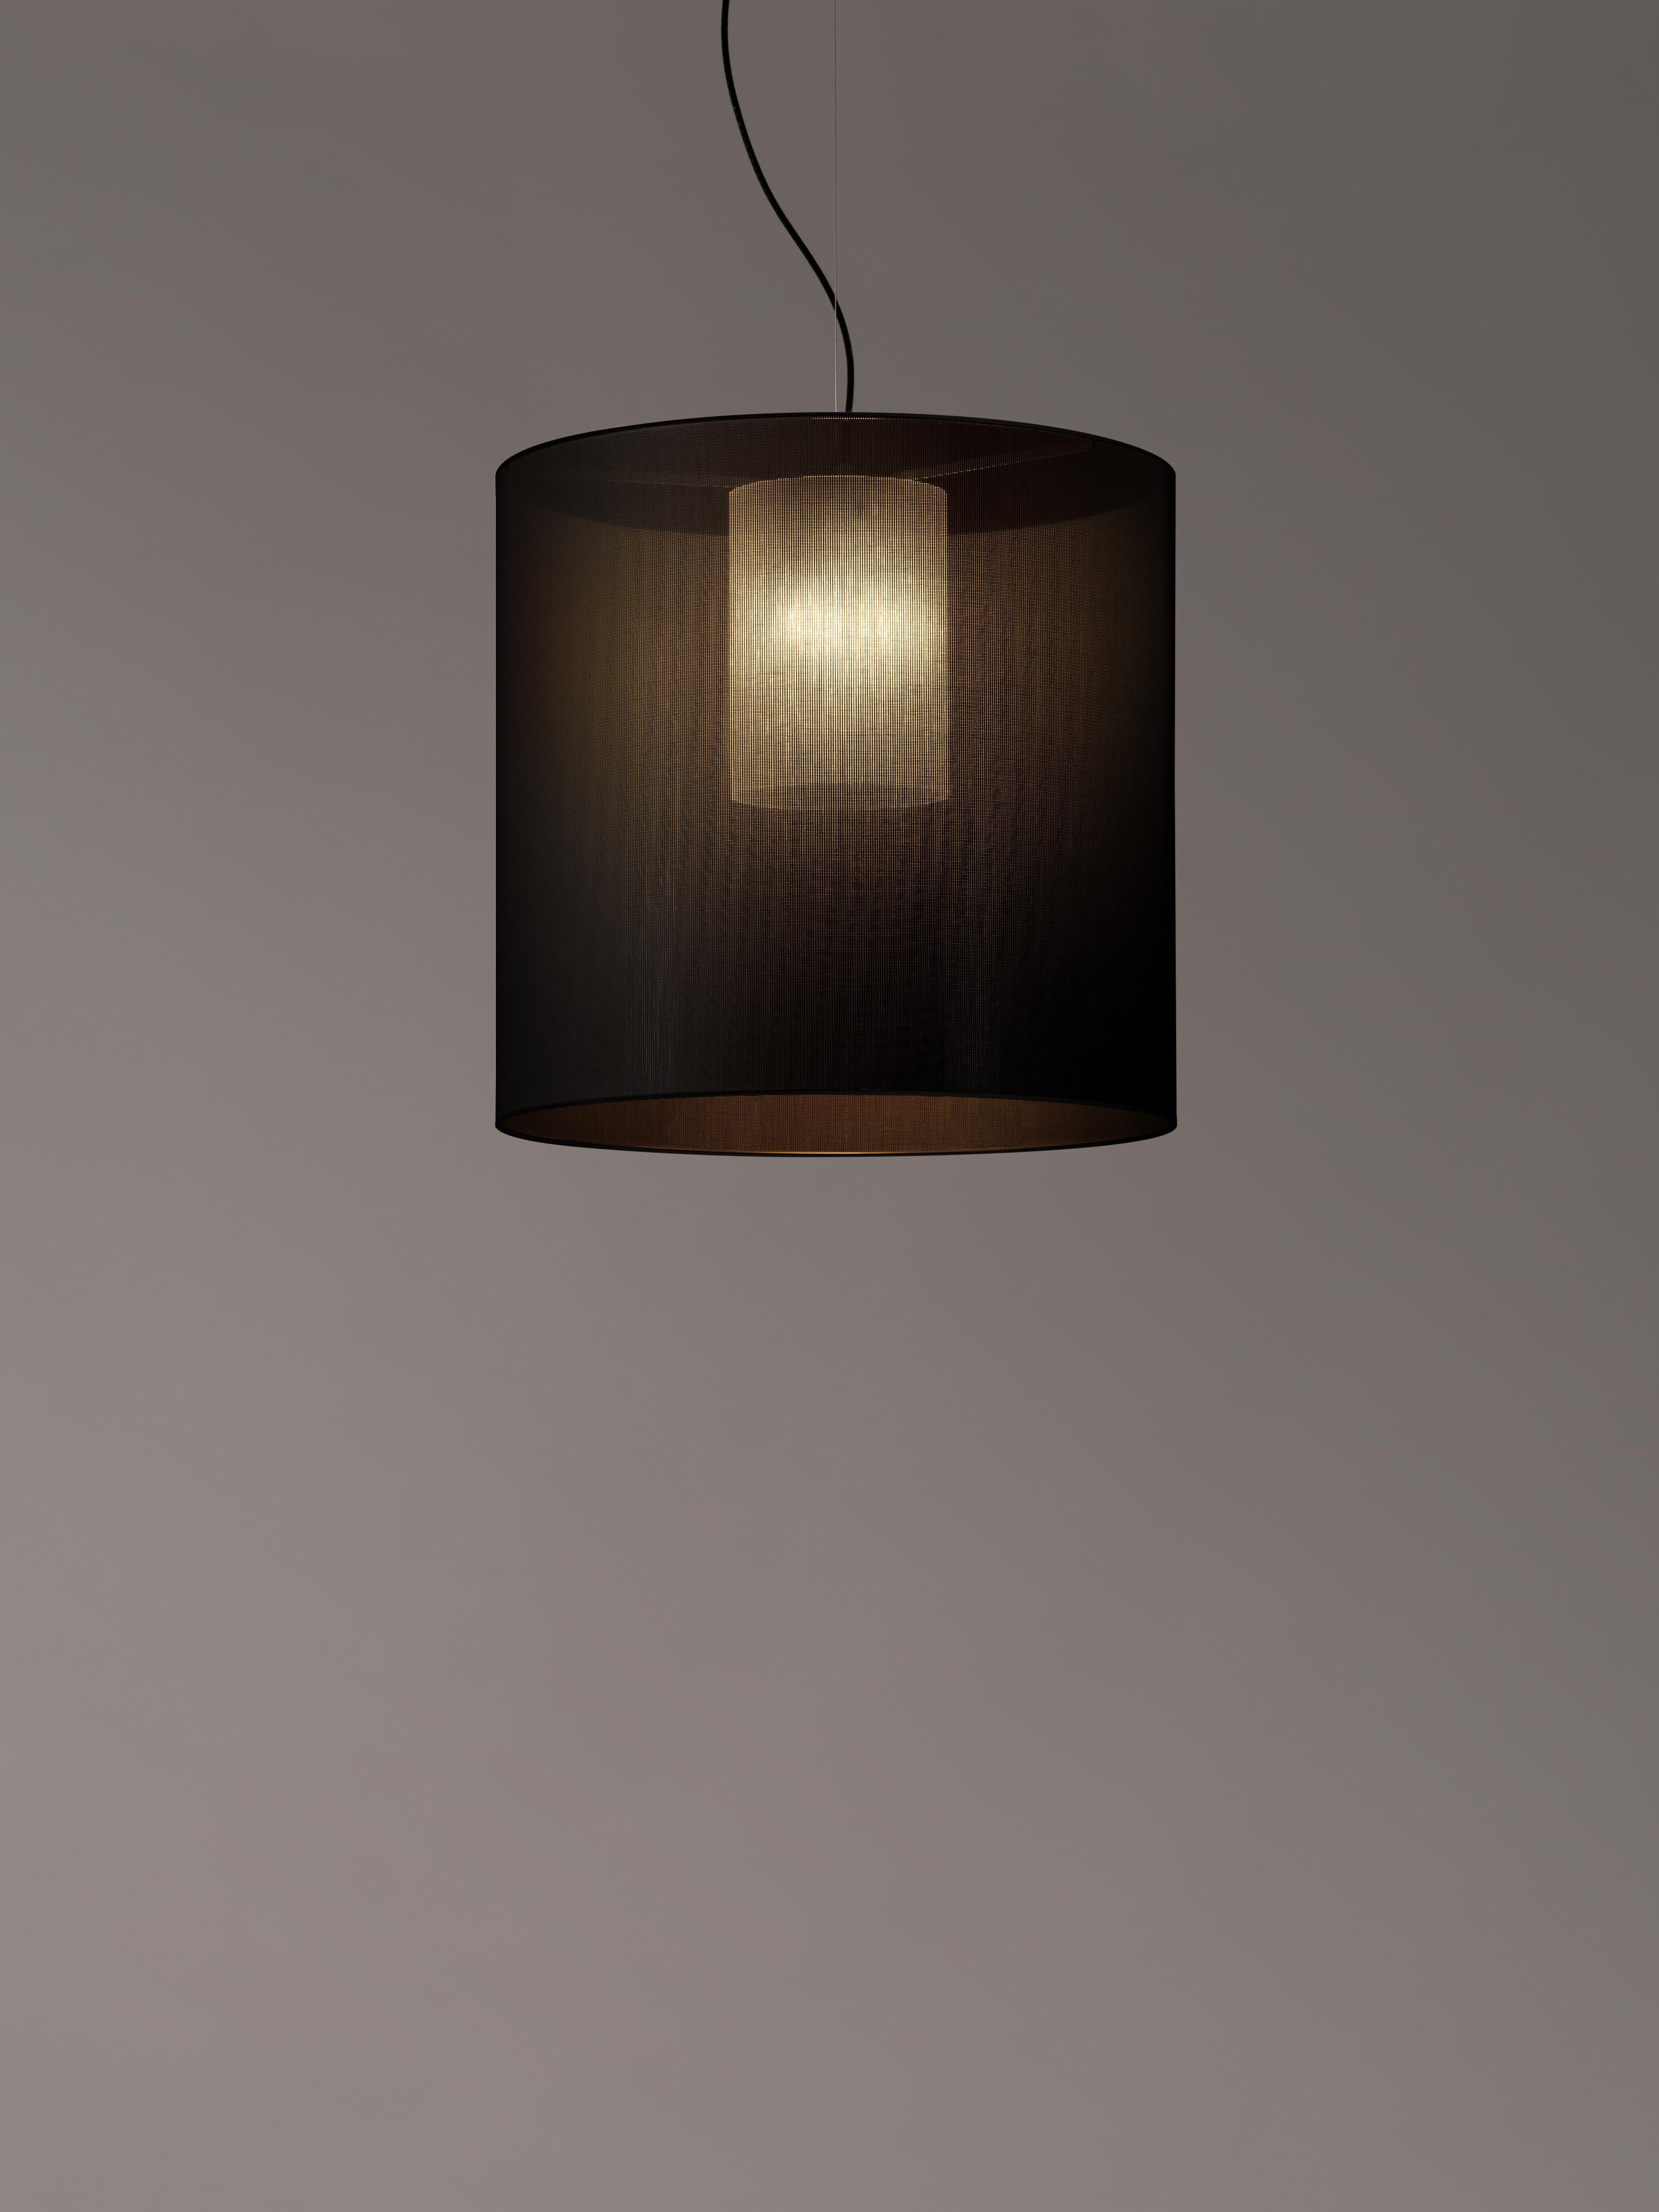 Black Moaré L pendant lamp by Antoni Arola
Dimensions: D 62 x H 60 cm
Materials: Metal, polyester.
Available in other colors and sizes.

Moaré’s multiple combinations of formats and colours make it highly versatile. The series takes its name